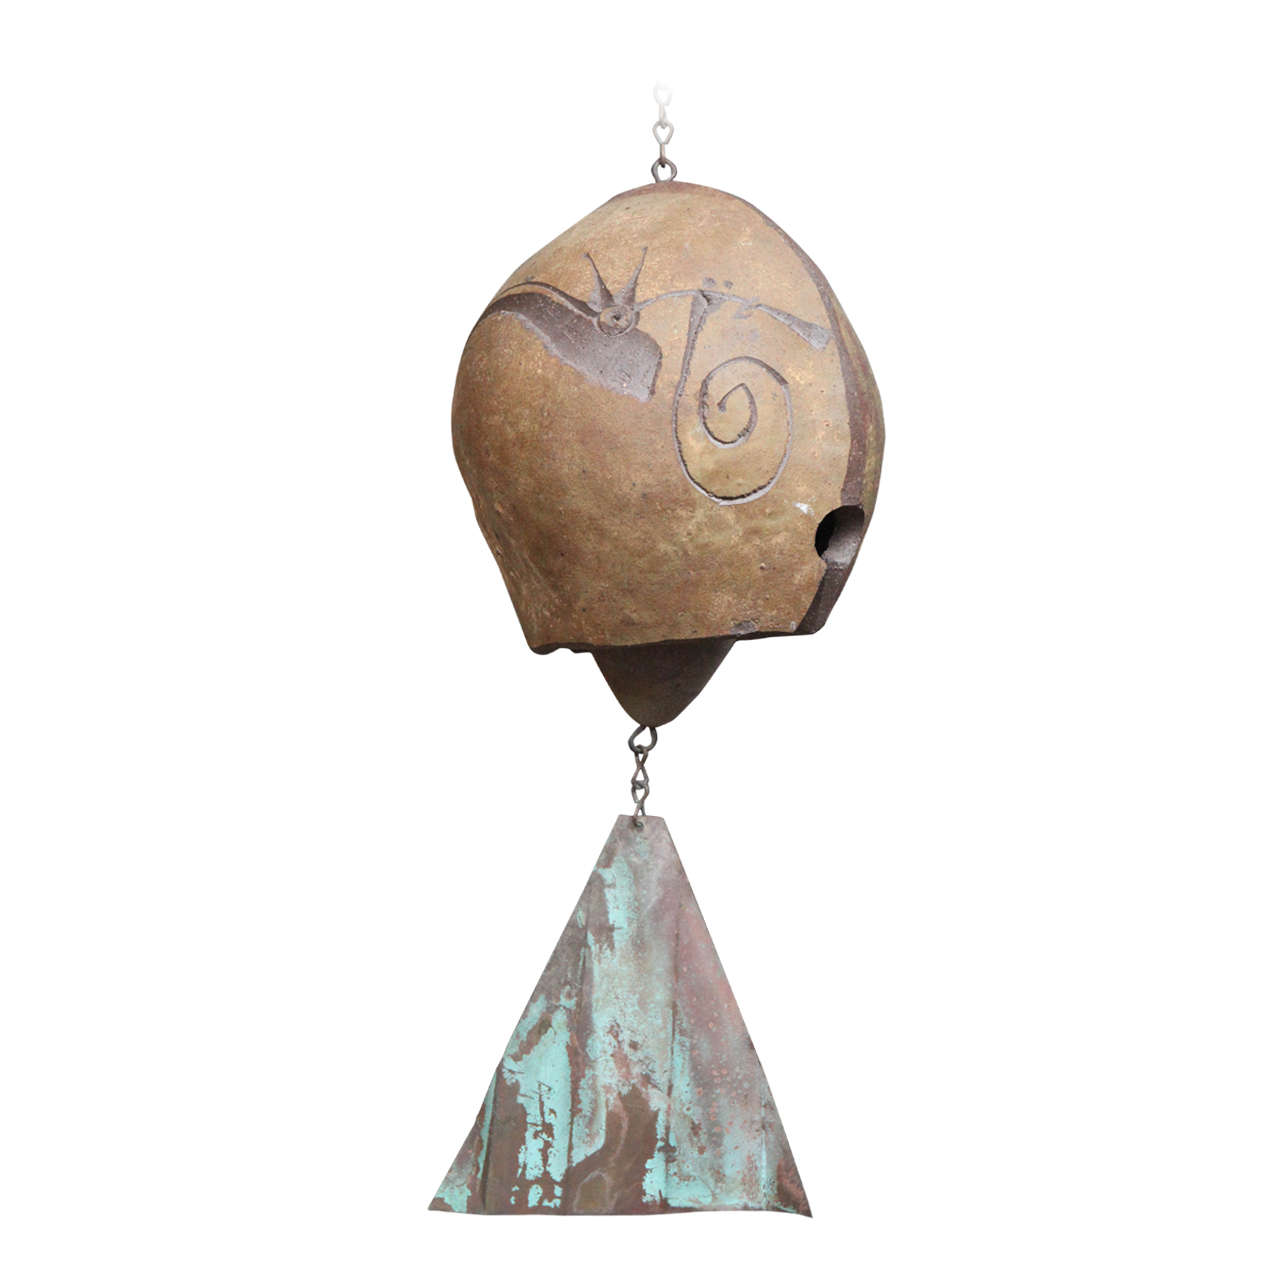 Ceramic Bell by Paolo Soleri